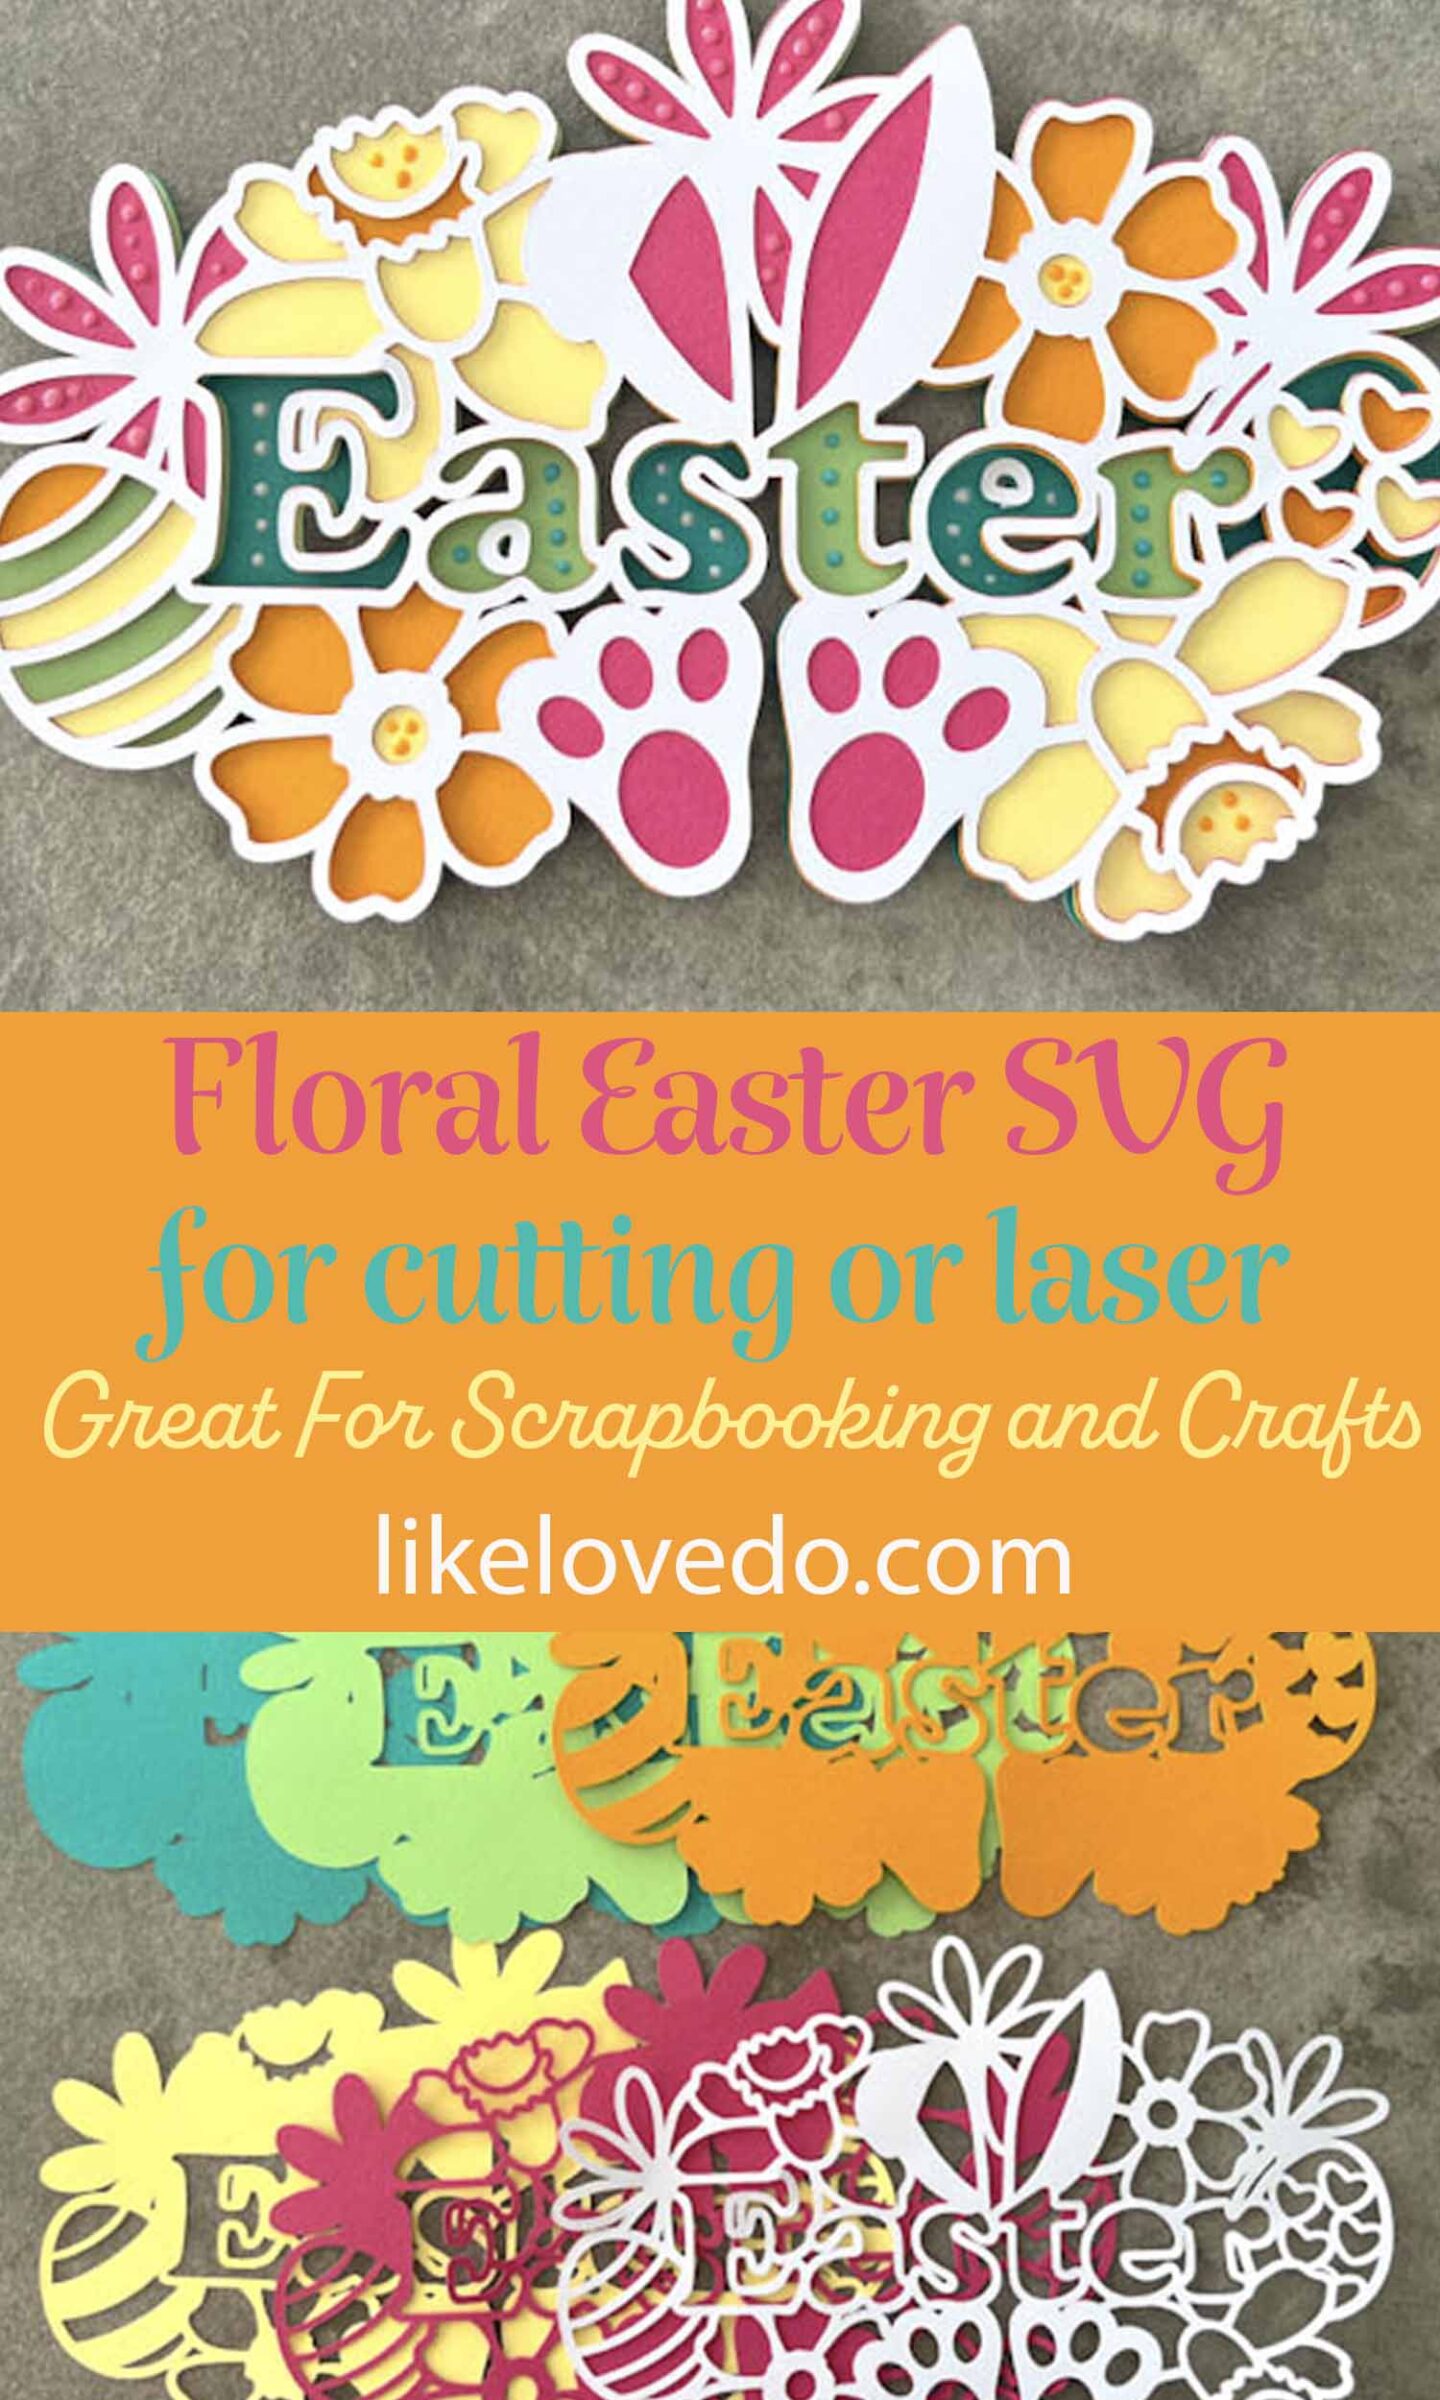 Easter floral word layered cut file in 6 layers for Cricut , Silhouette and laser designs